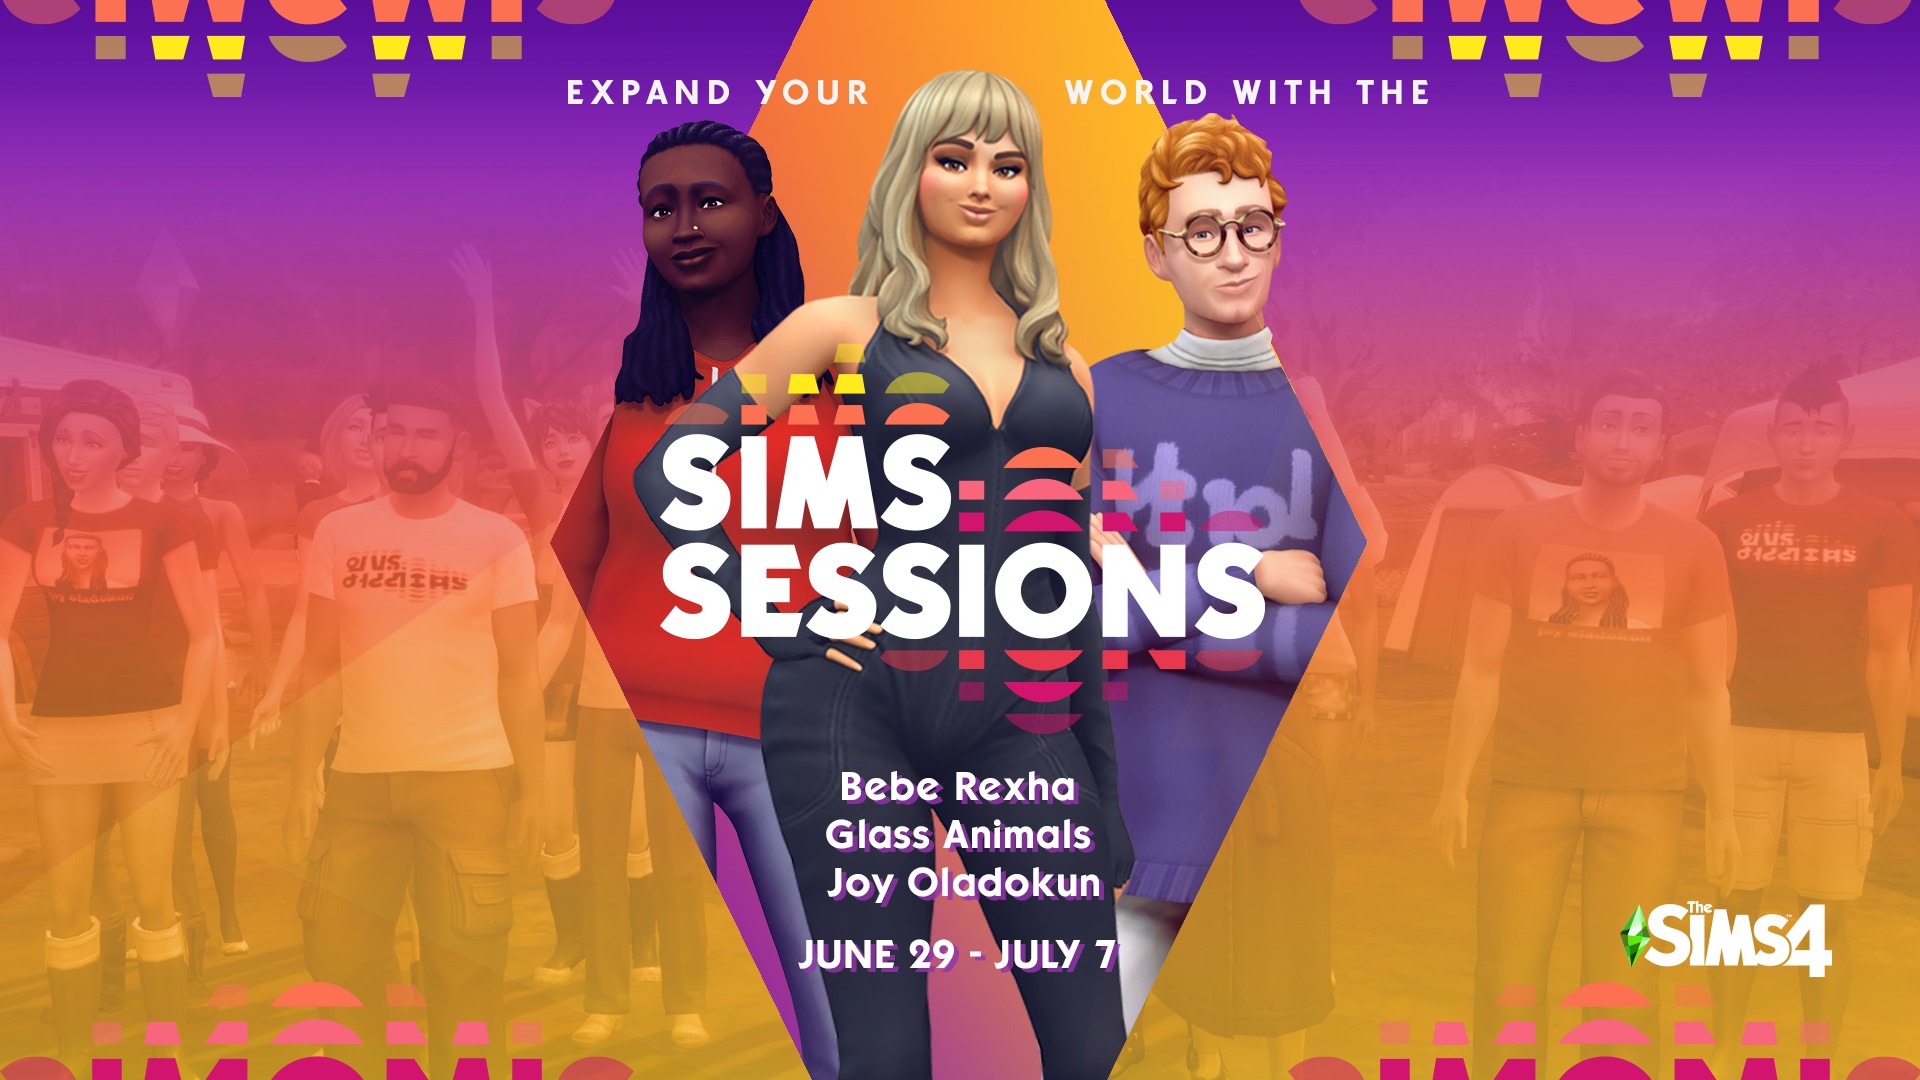 Rock Out with Bebe Rexha, Joy Oladokun, and Glass Animals in The Sims 4 -  Xbox Wire